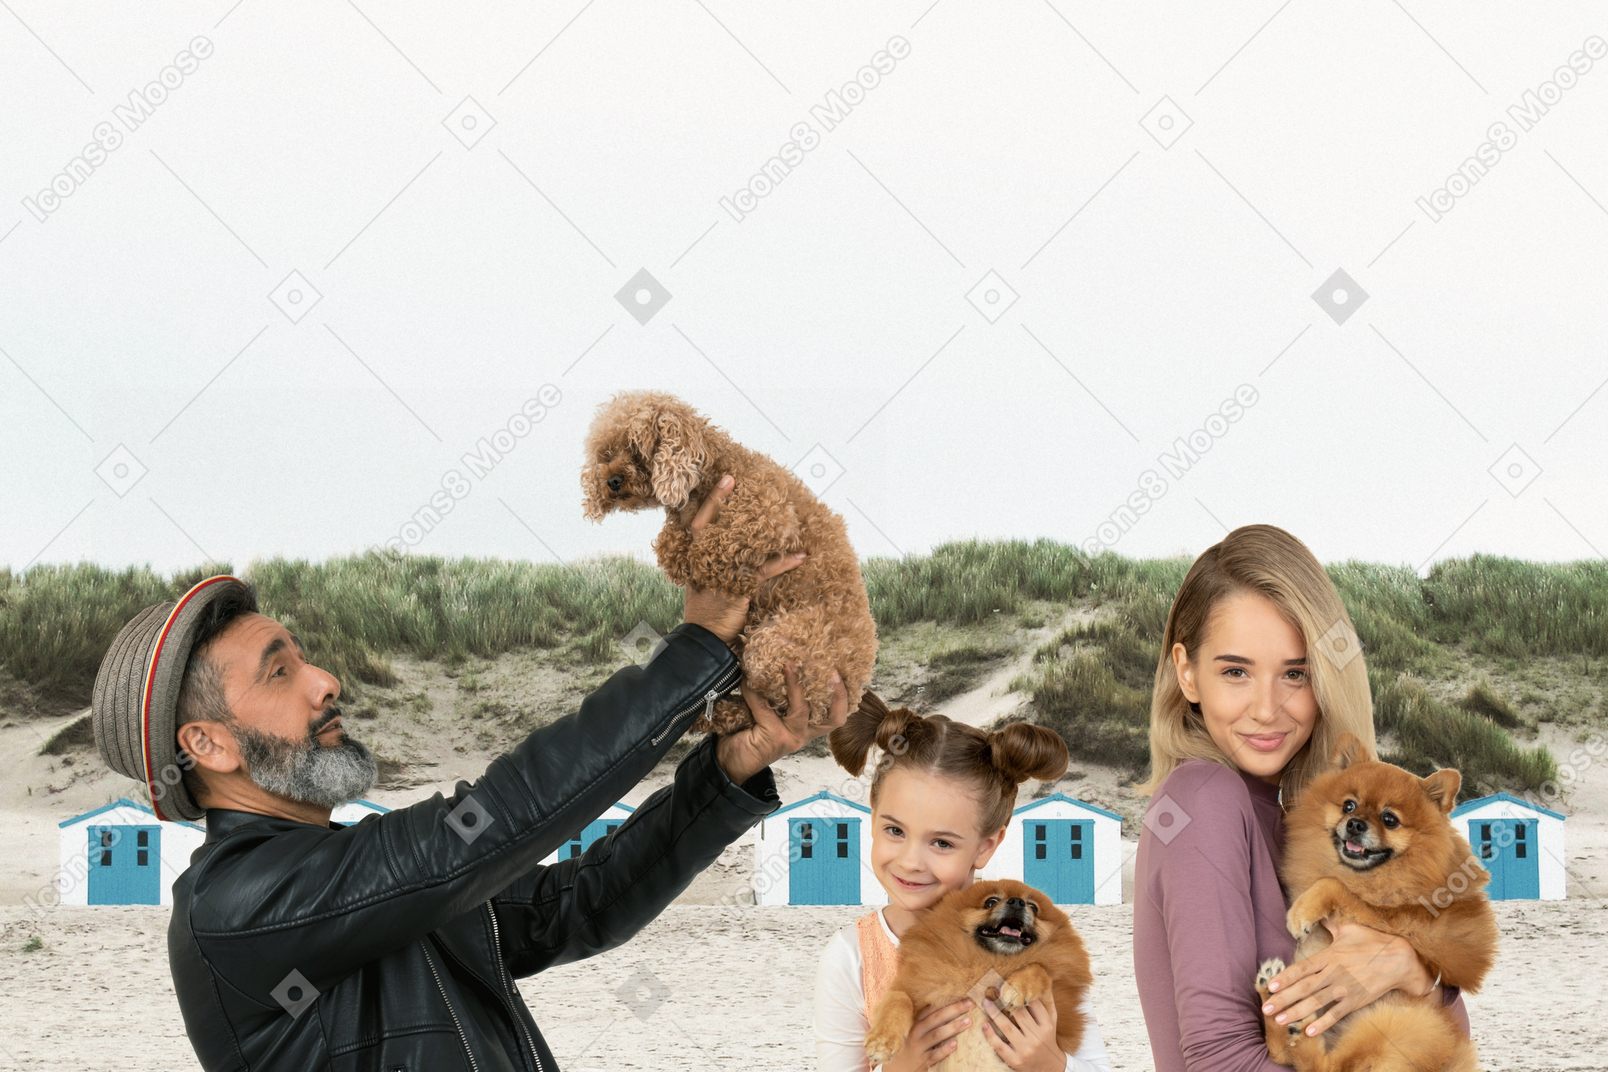 Mature man, kid girl and young woman with their pets